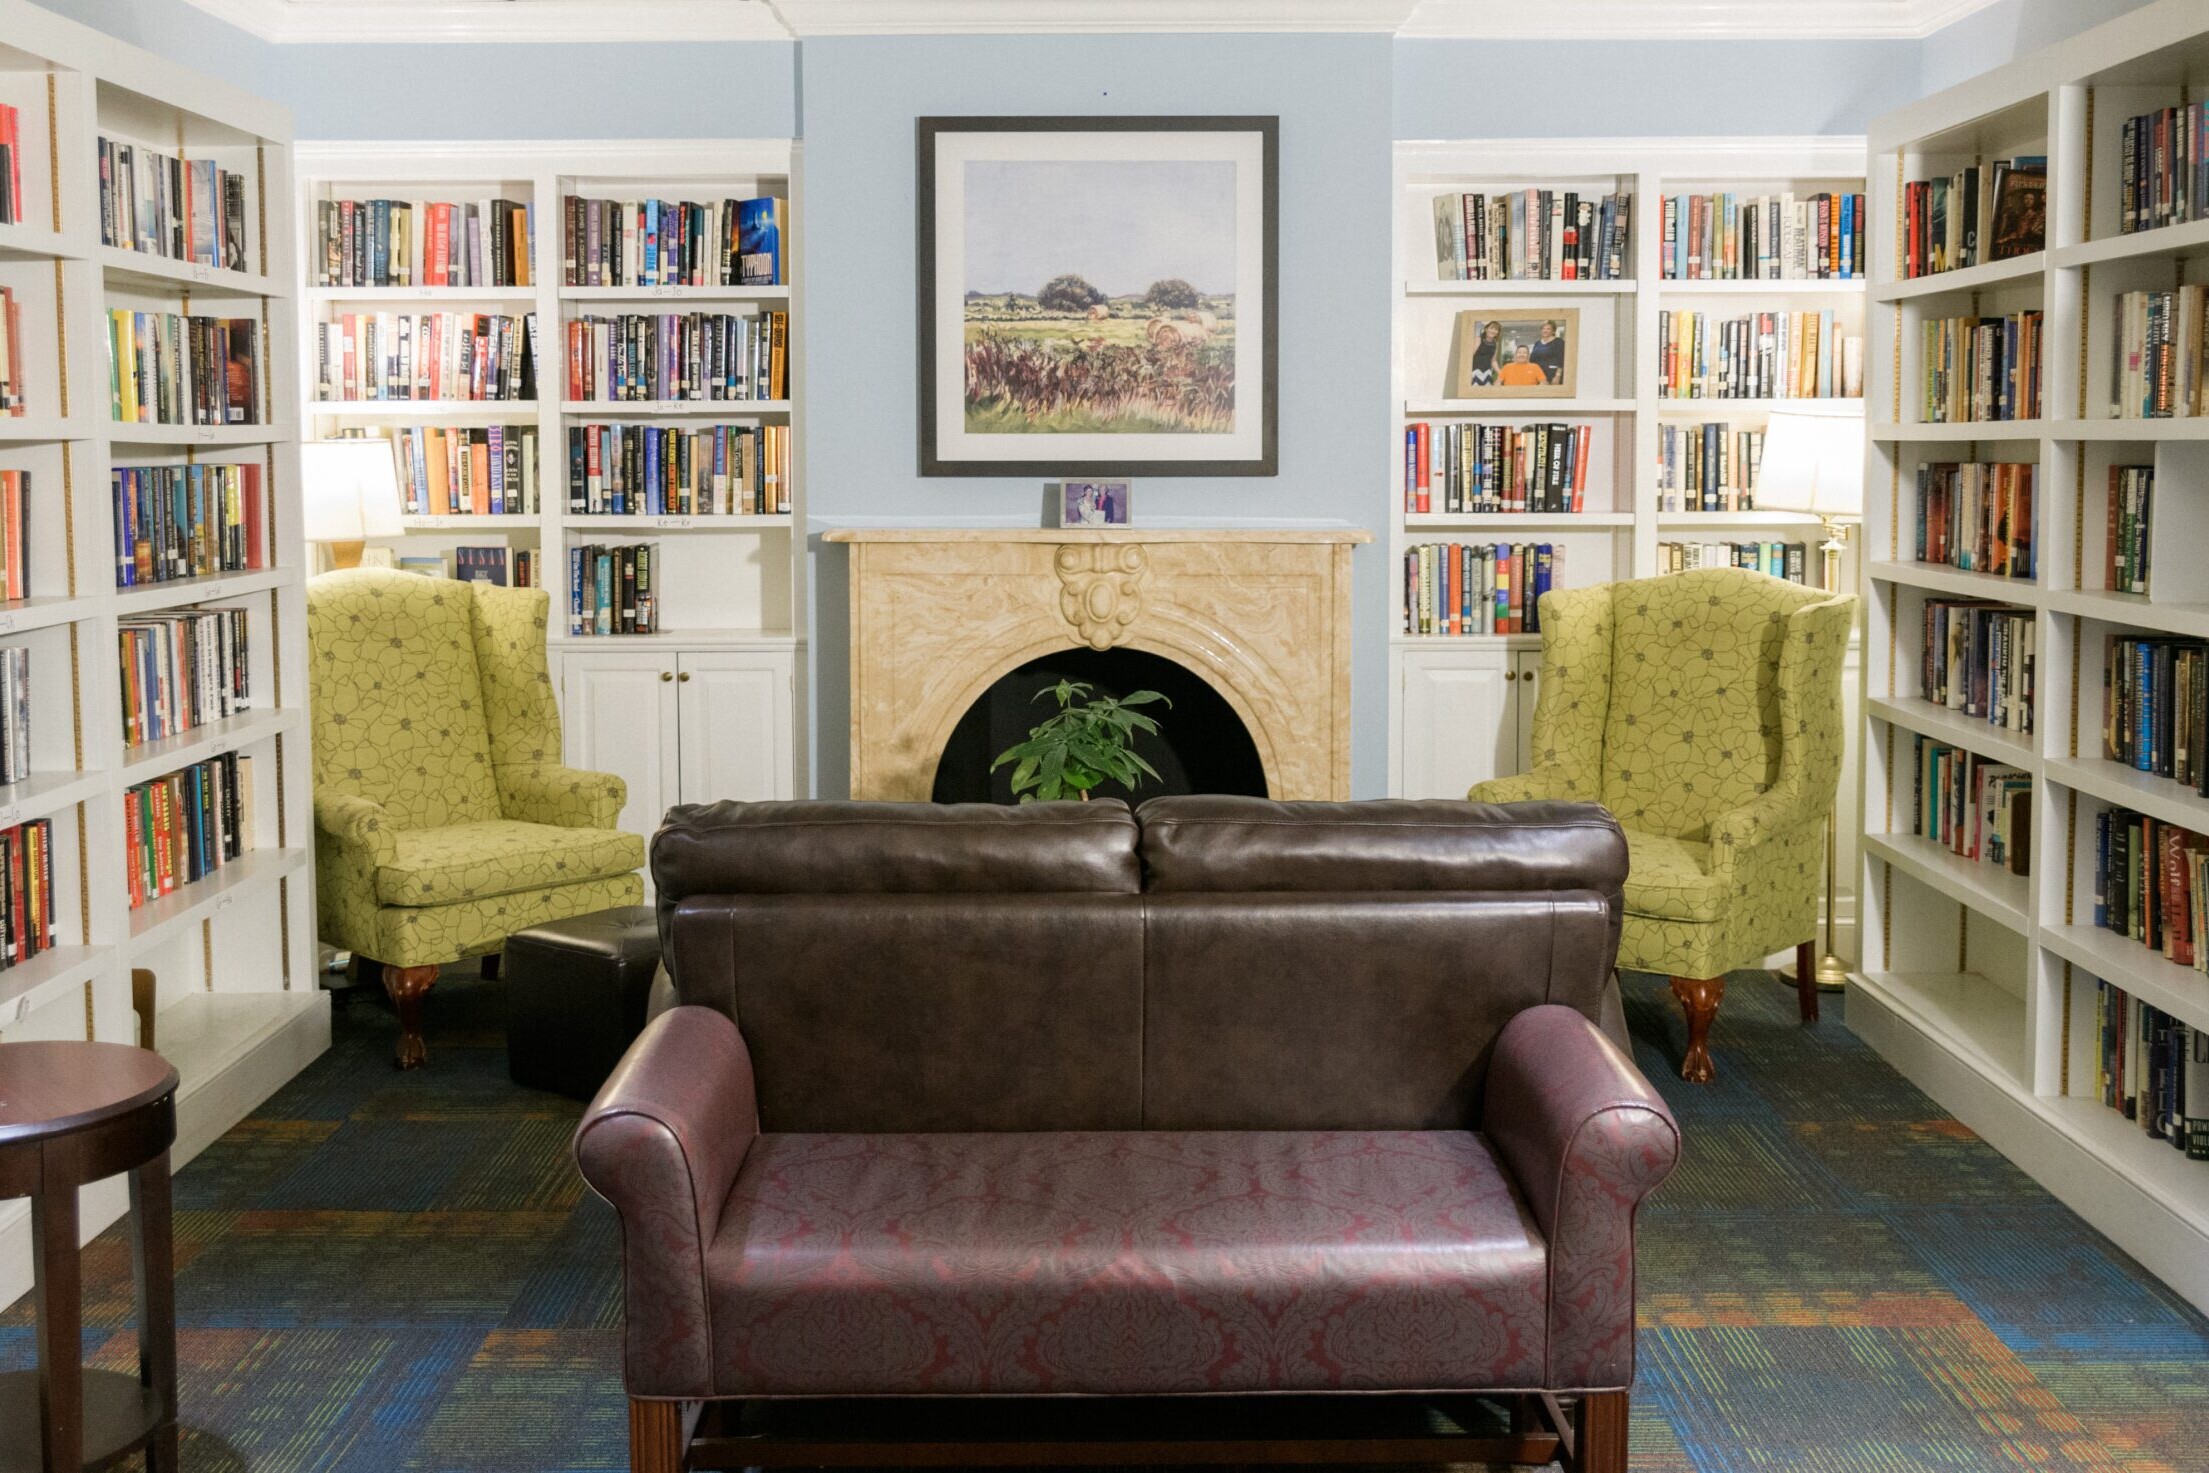 two couches and two chairs along with a fireplace are surrounded by books on bookshelves